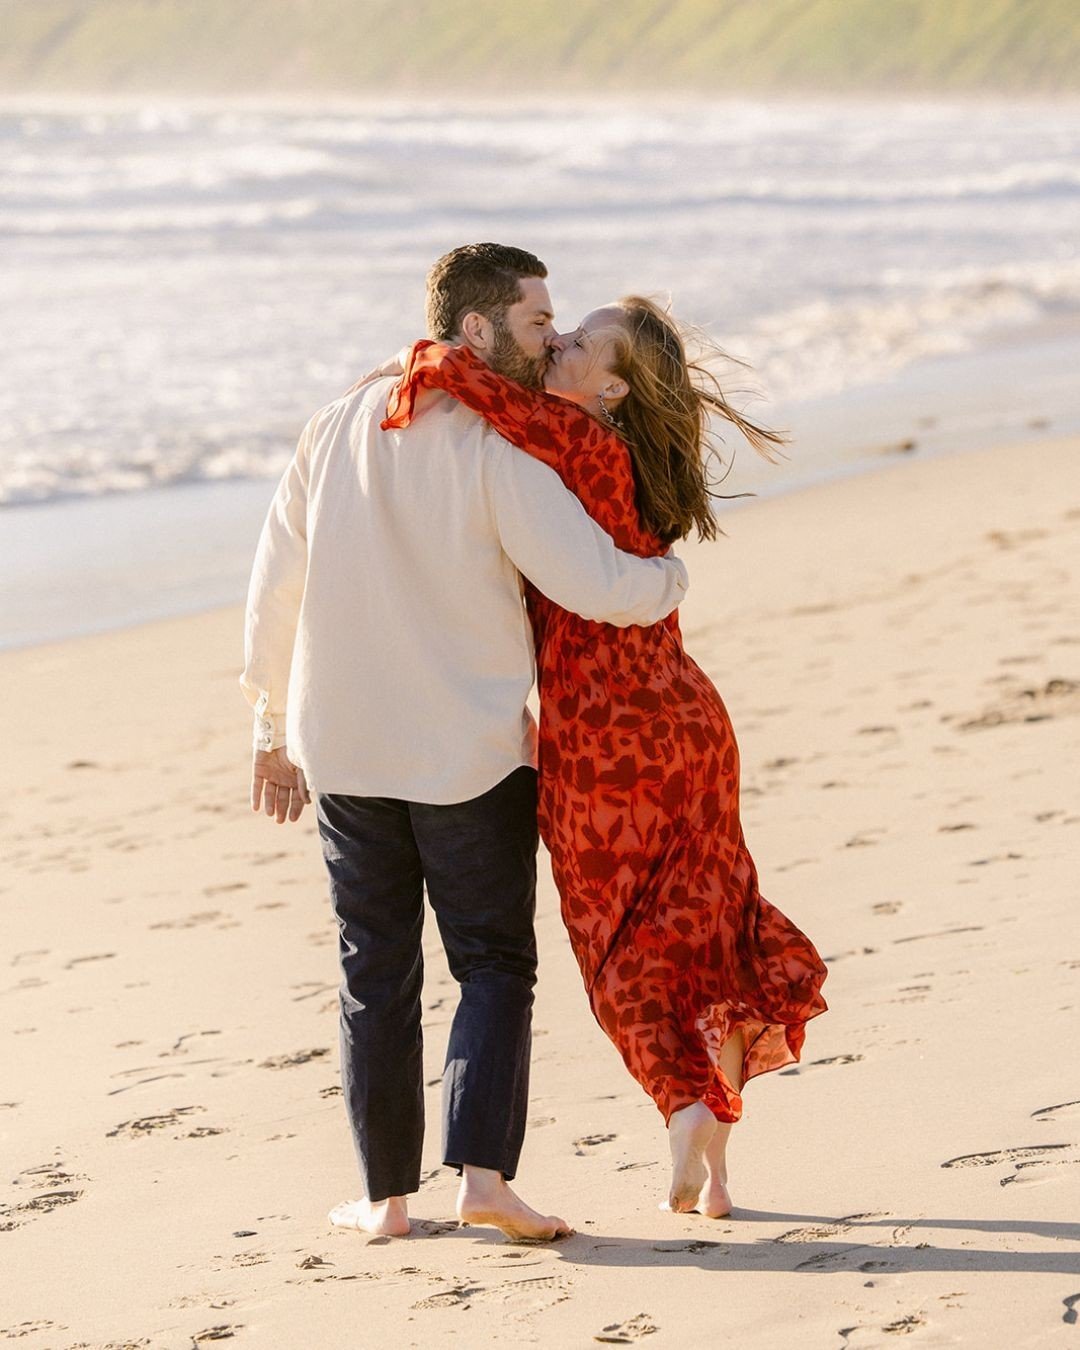 Erin &amp; Graham's engagement session was bright, fun, and full of love (just like them).⁠
⁠
We got to do a little bit of everything, photos at their gorgeous home and in the sun and sand. Captured some digital and film. It was a day full of ALL the